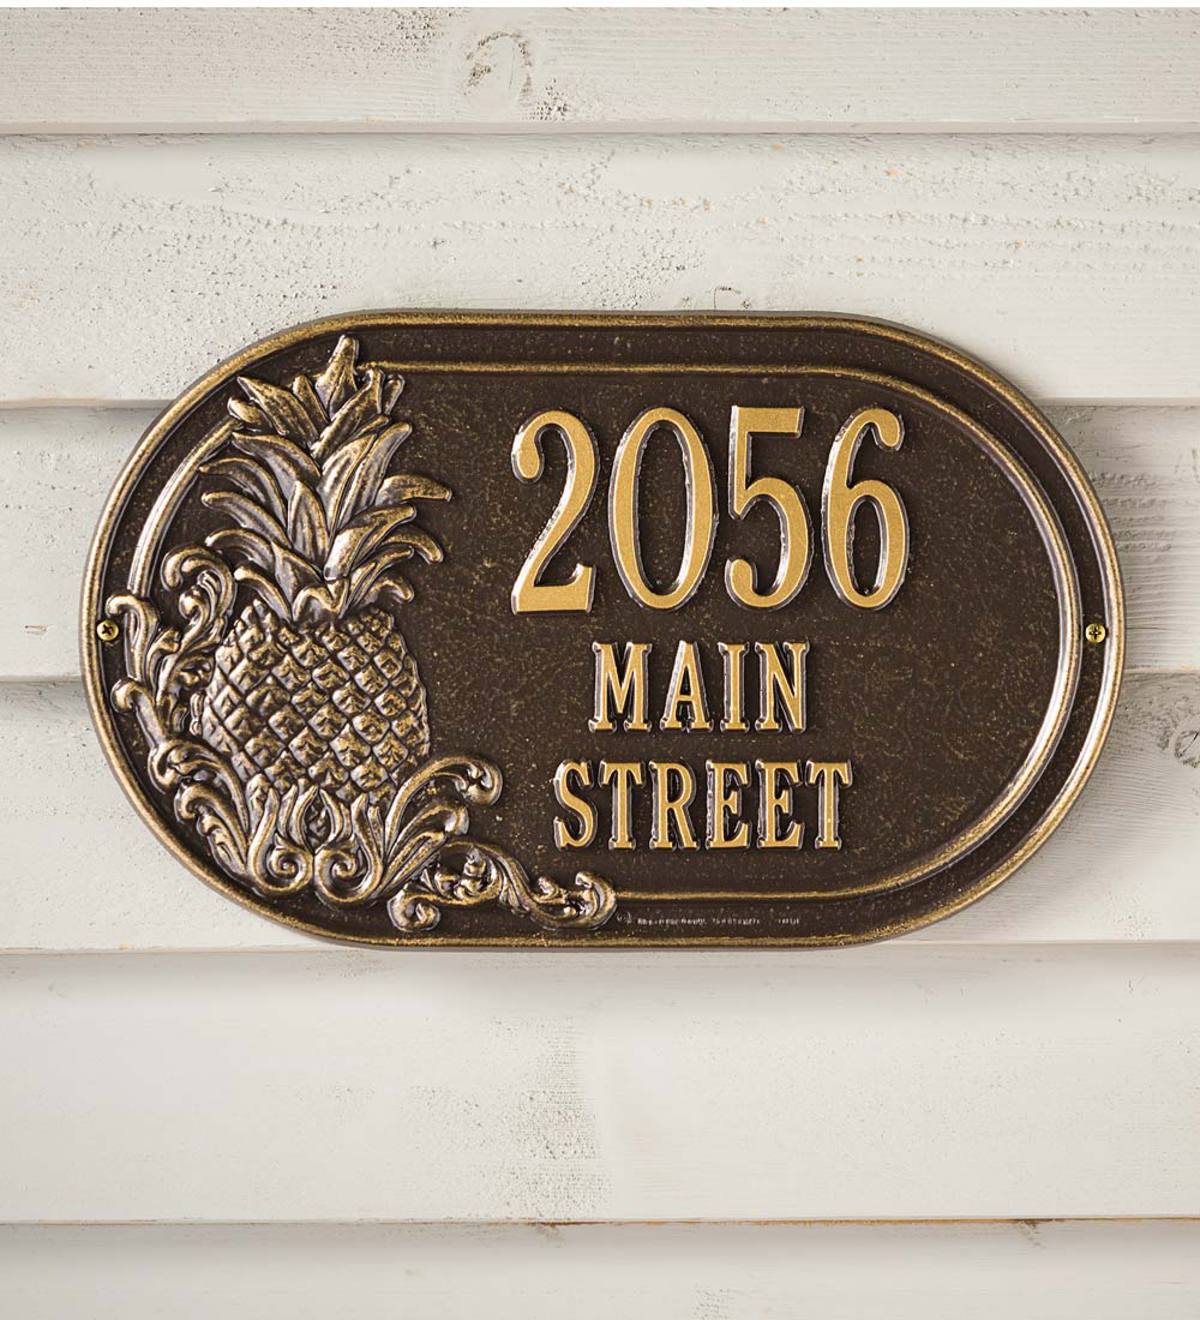 Personalized Pineapple Address Plaque